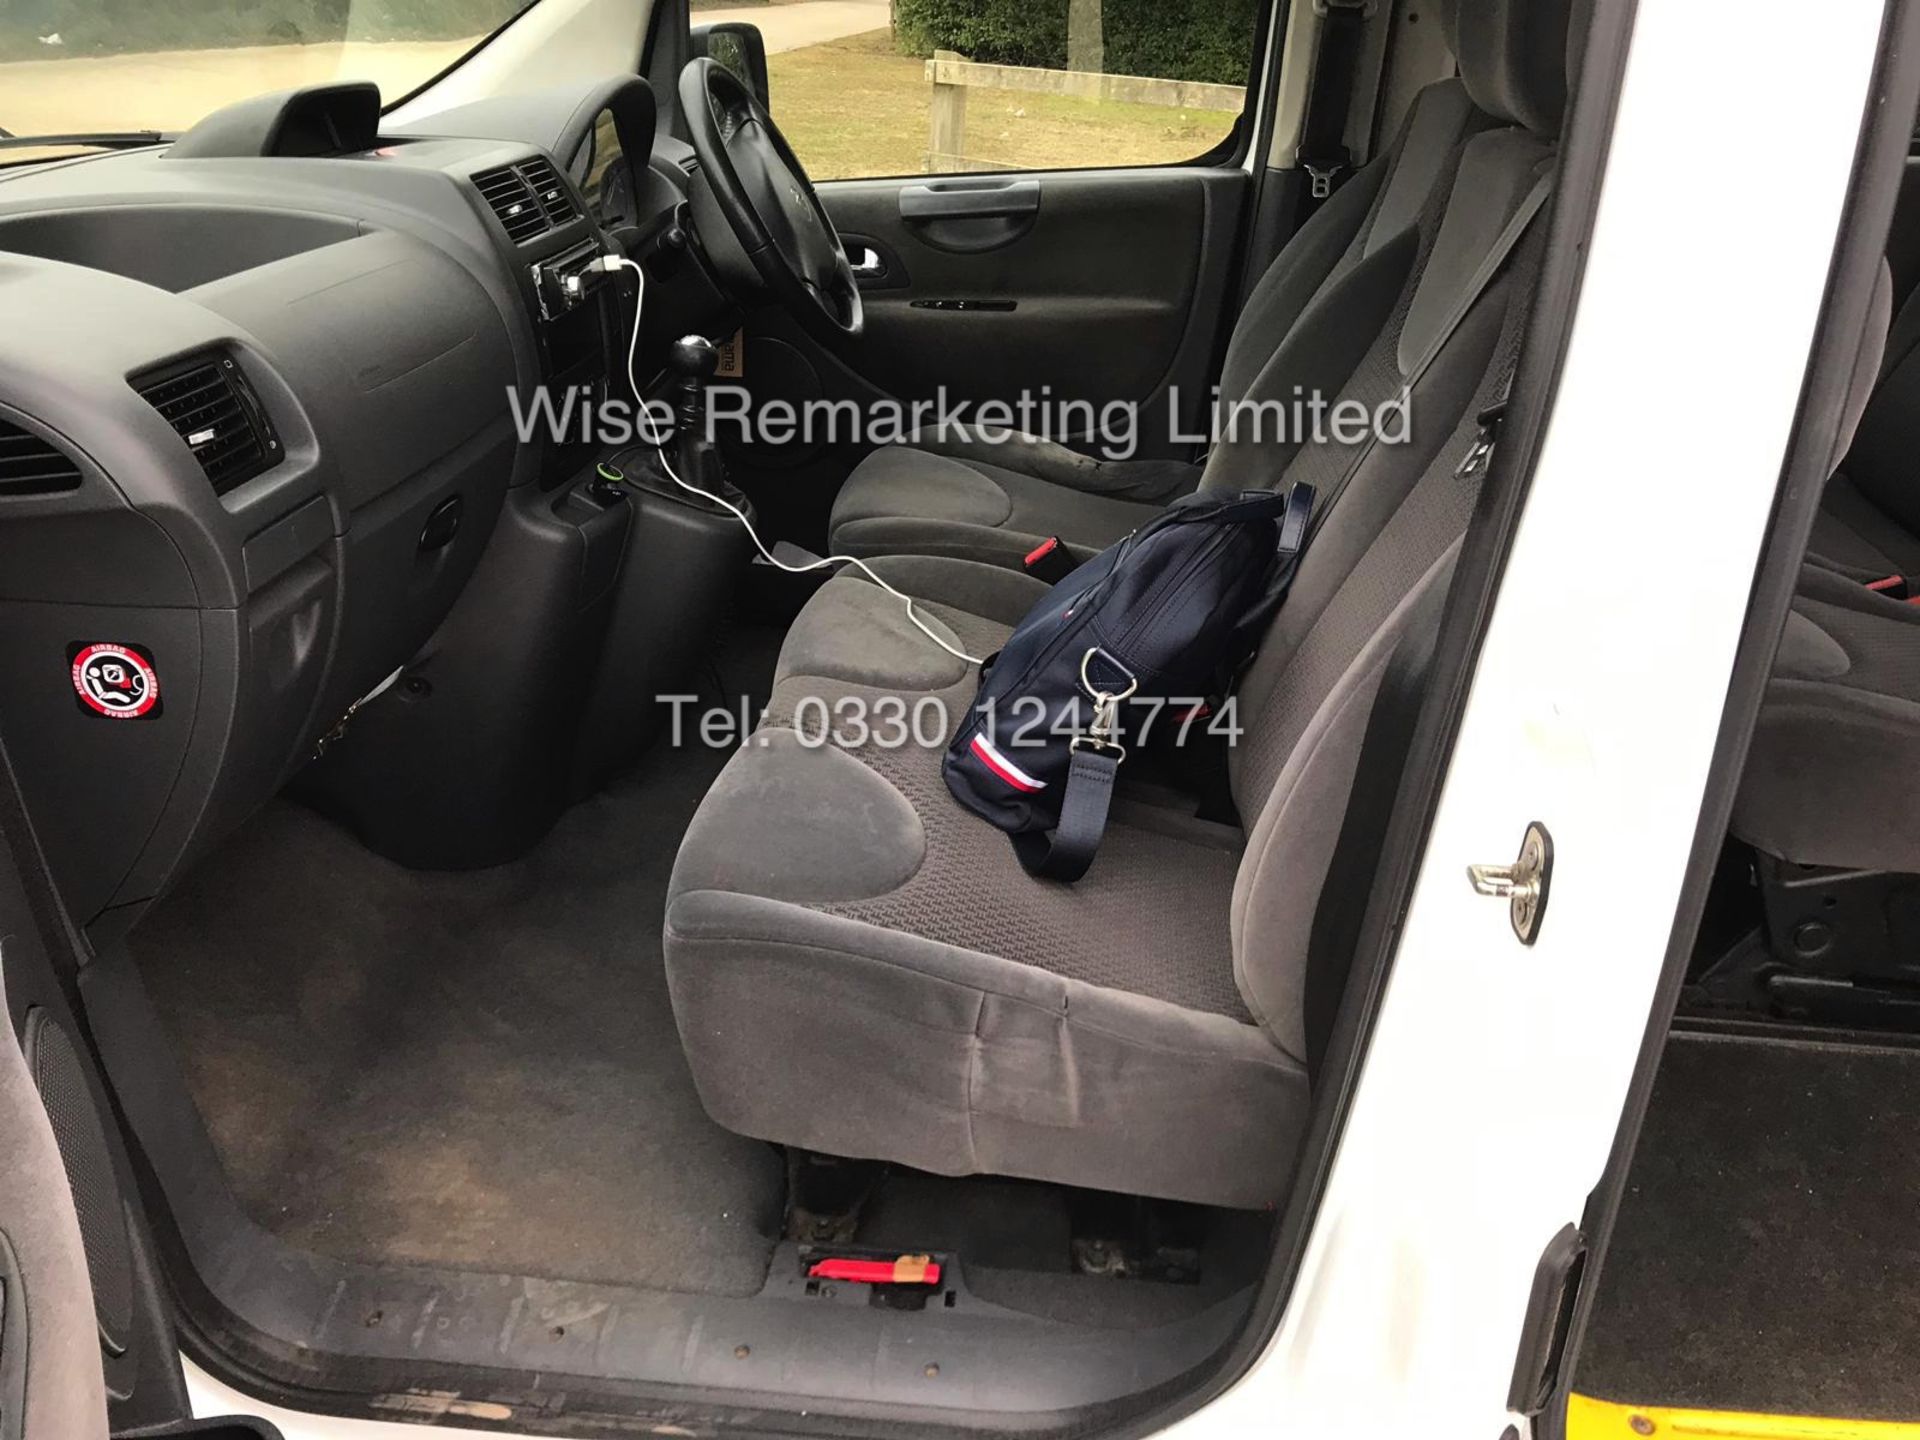 PEUGEOT EUROBUS S *MPV 8 SEATER* 2.0l (2013 - 13 REG) **AIR CON** - 1 OWNER FROM NEW - Image 17 of 19